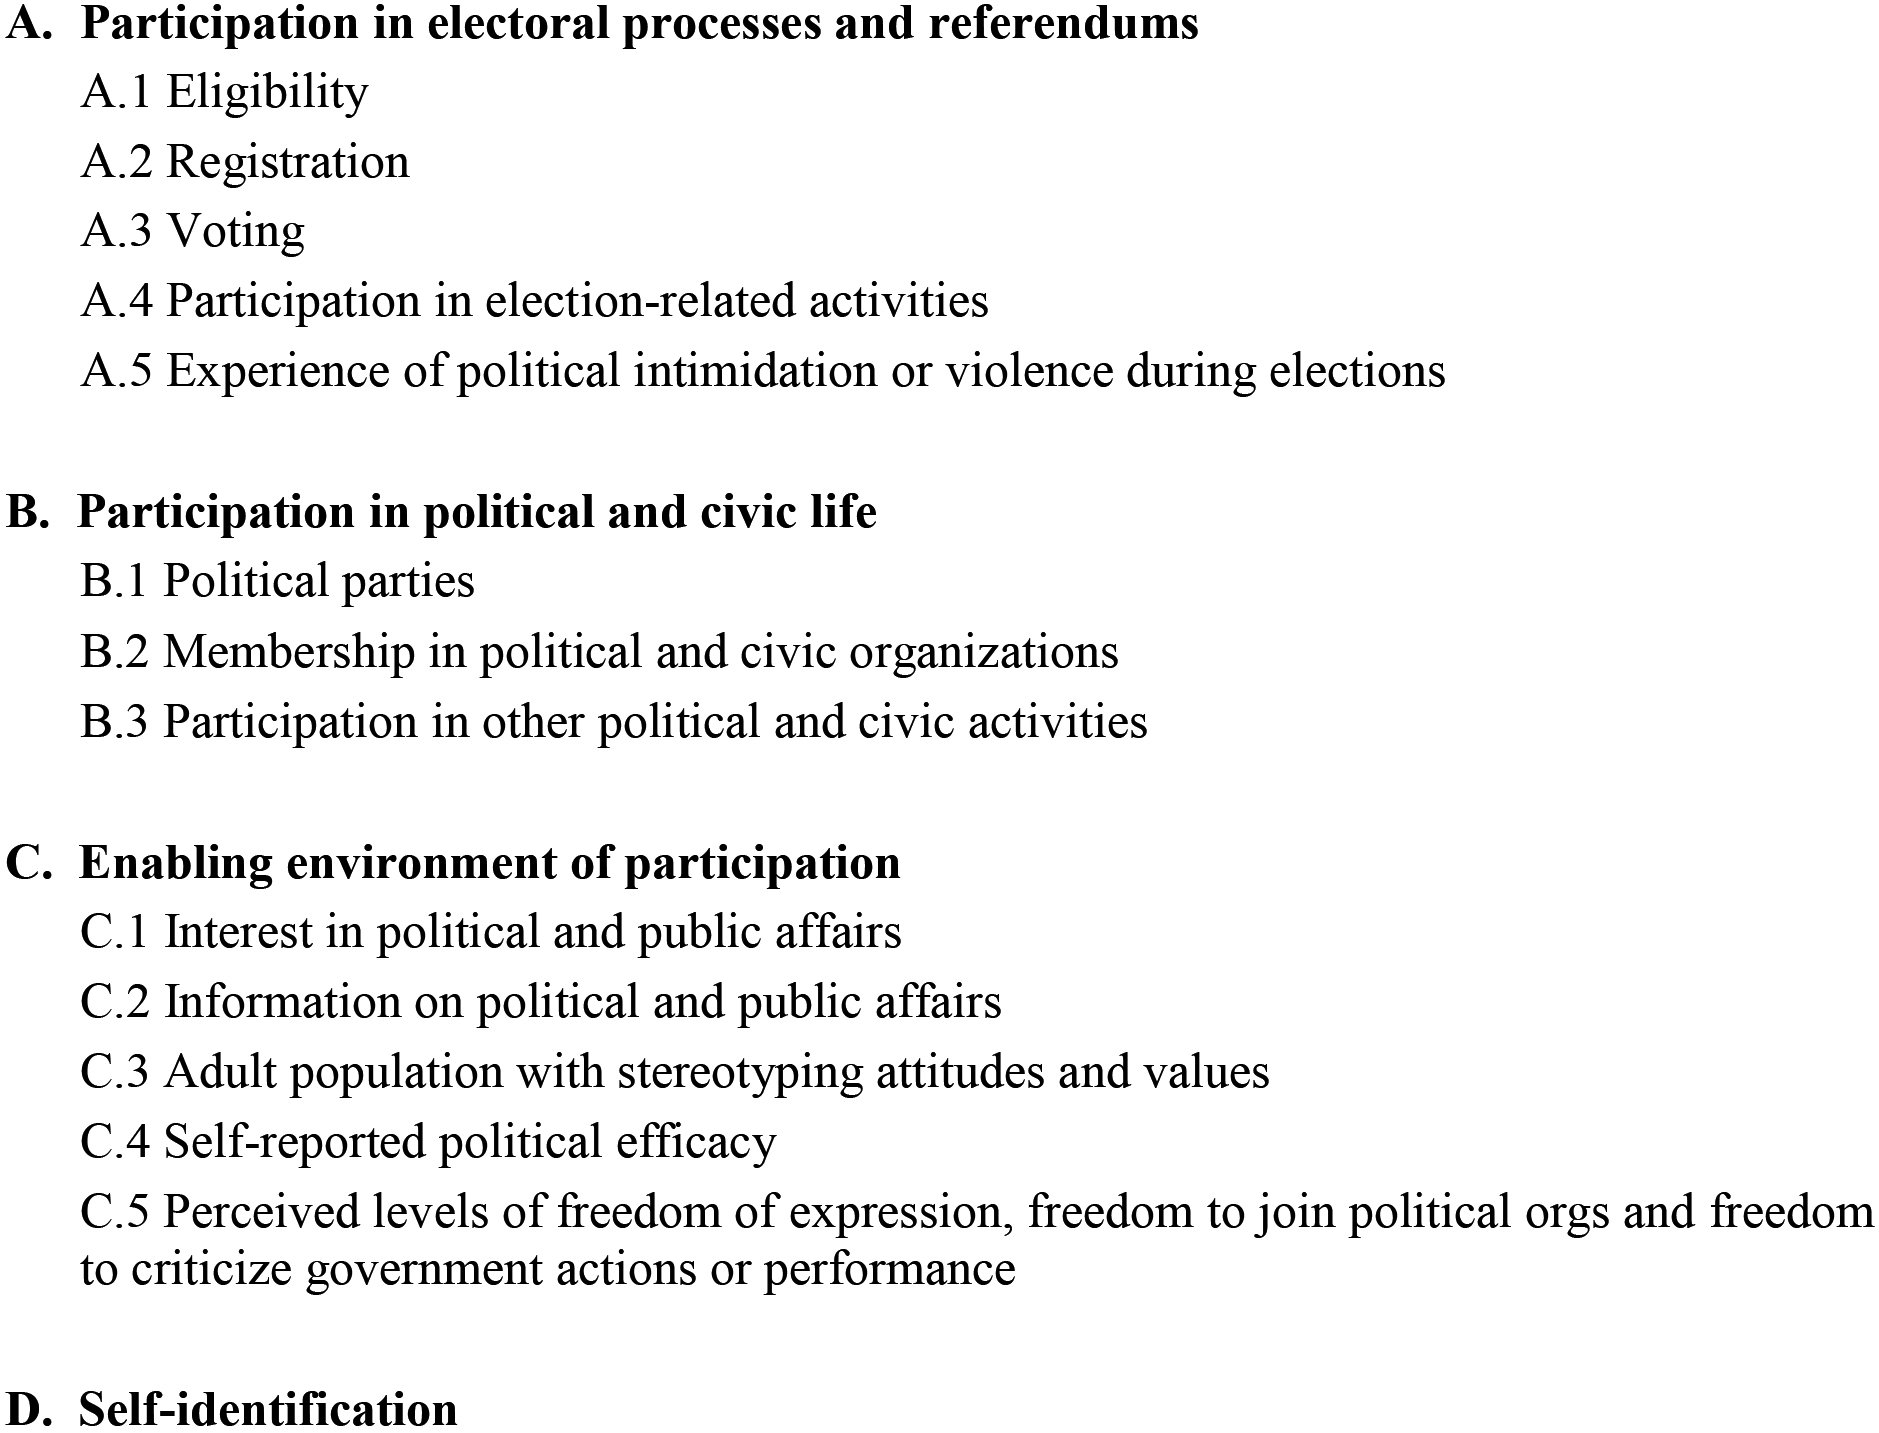 Measurement areas covered by the model questionnaire on participation in political and public affairs.